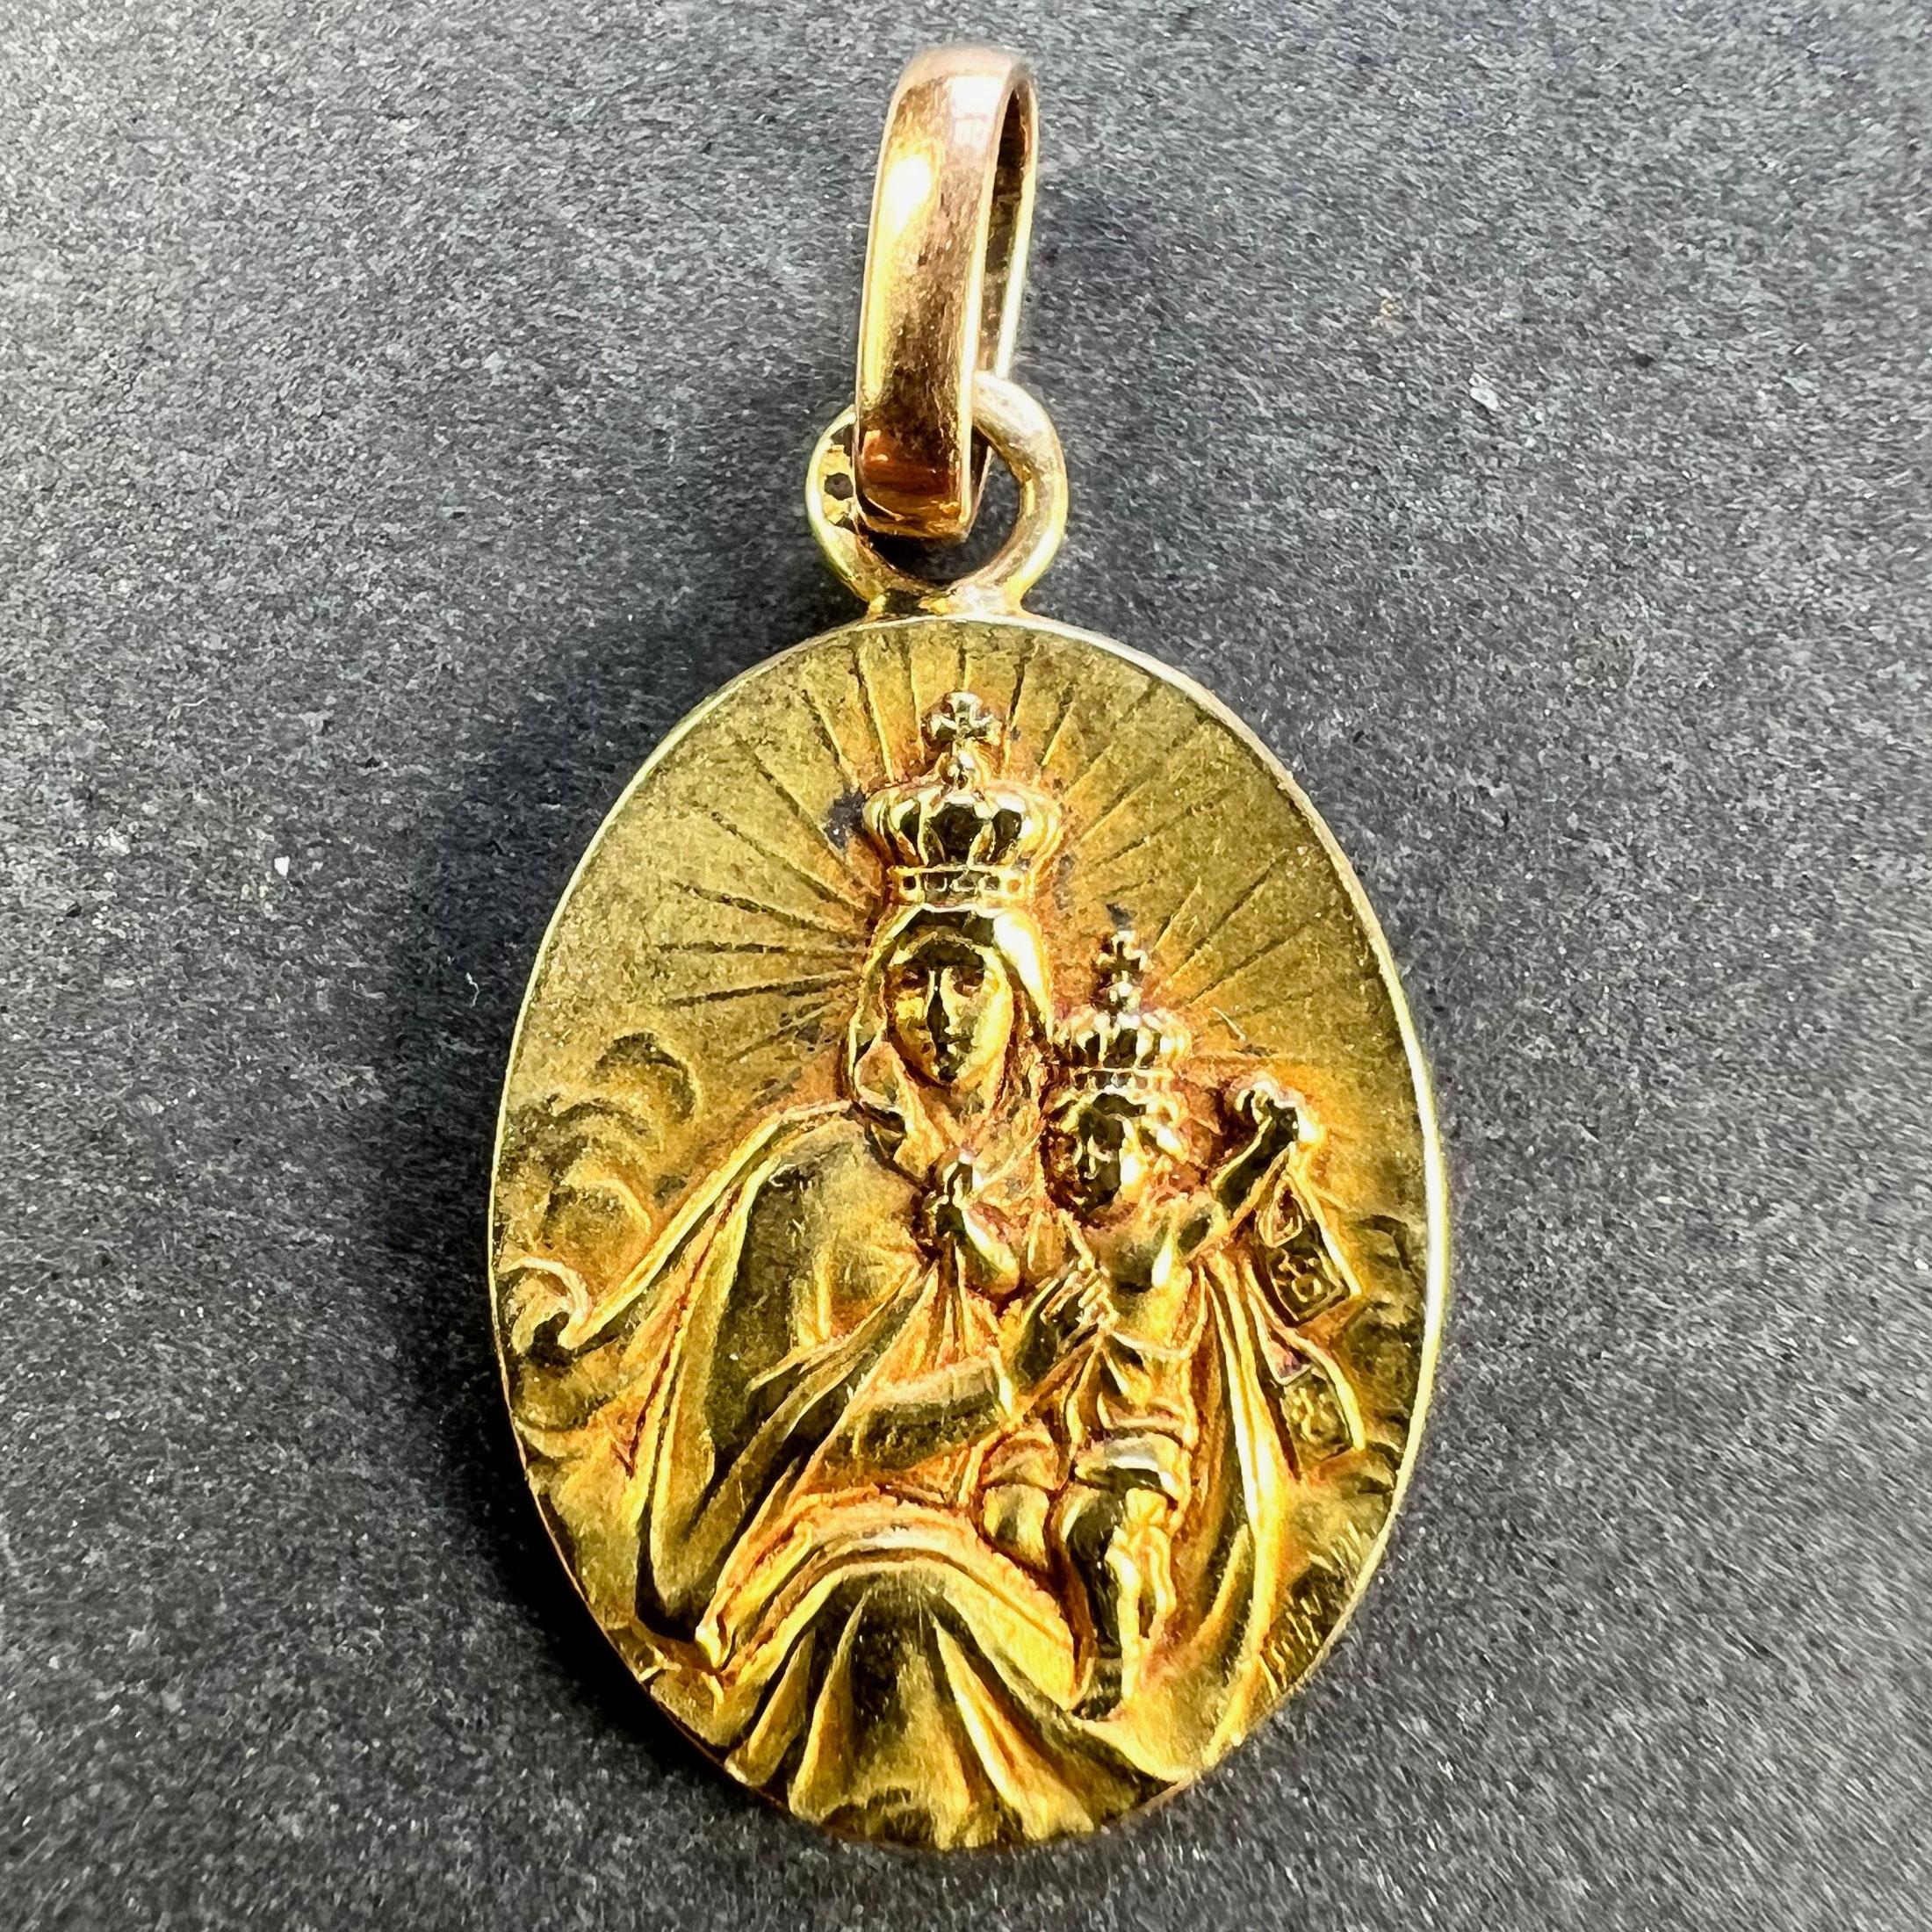 A French 18 karat (18K) yellow gold charm pendant designed as an oval medal depicting the Madonna and Child holding a pair of devotional scapulars to one side. The other side depicts Jesus Christ with the Sacred Heart. Stamped with the eagle's head